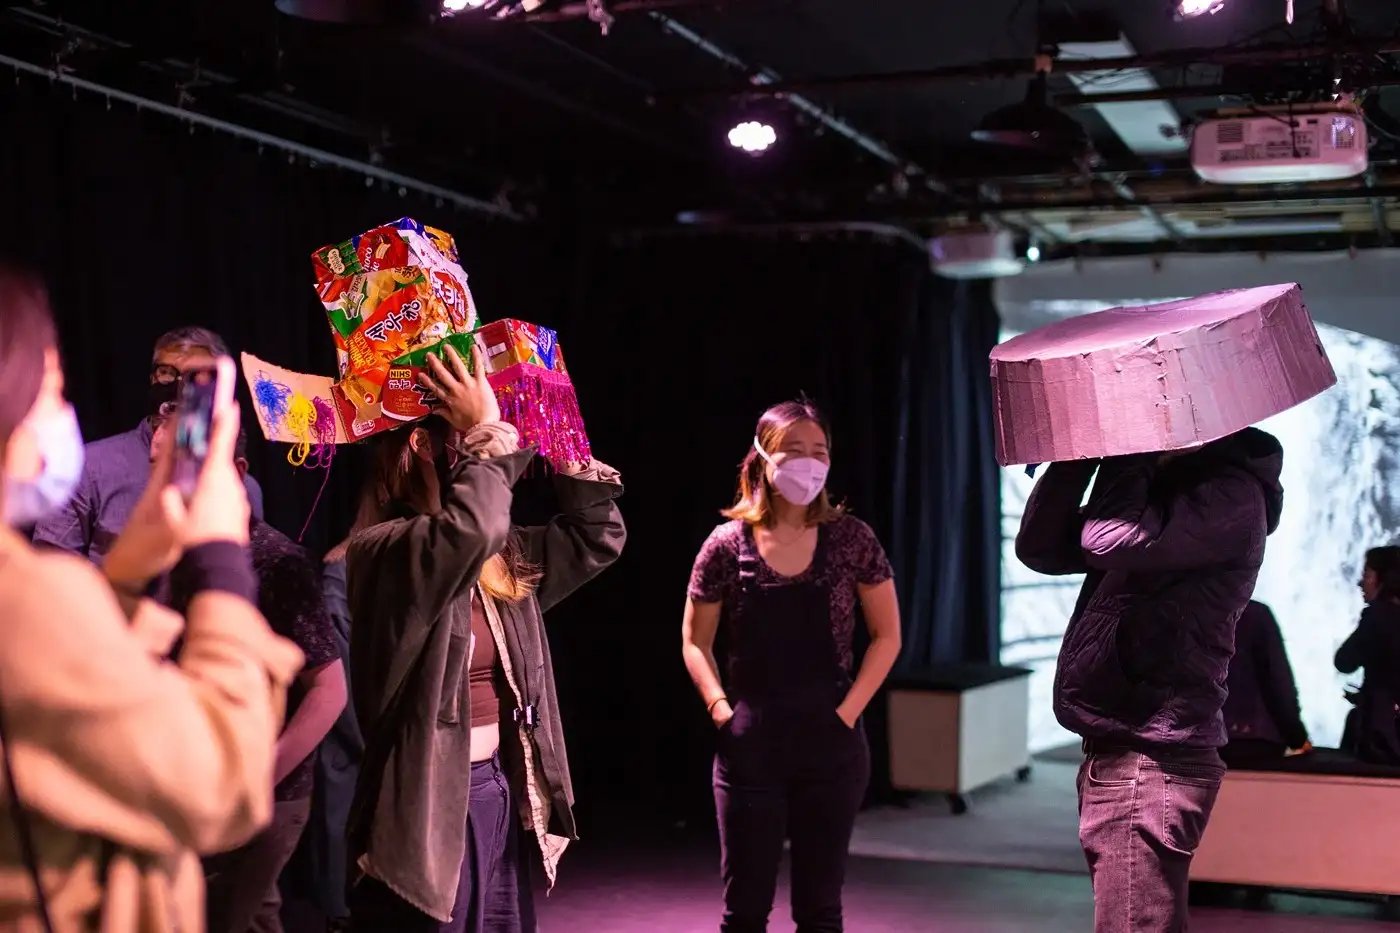 A group faces each other in the dark CultureHub studio, one wearing a cardboard washbasin on their head, while another wears a multicolored Korean crown covered with snack wrappers. Ann looks on from the back, wearing a mask.